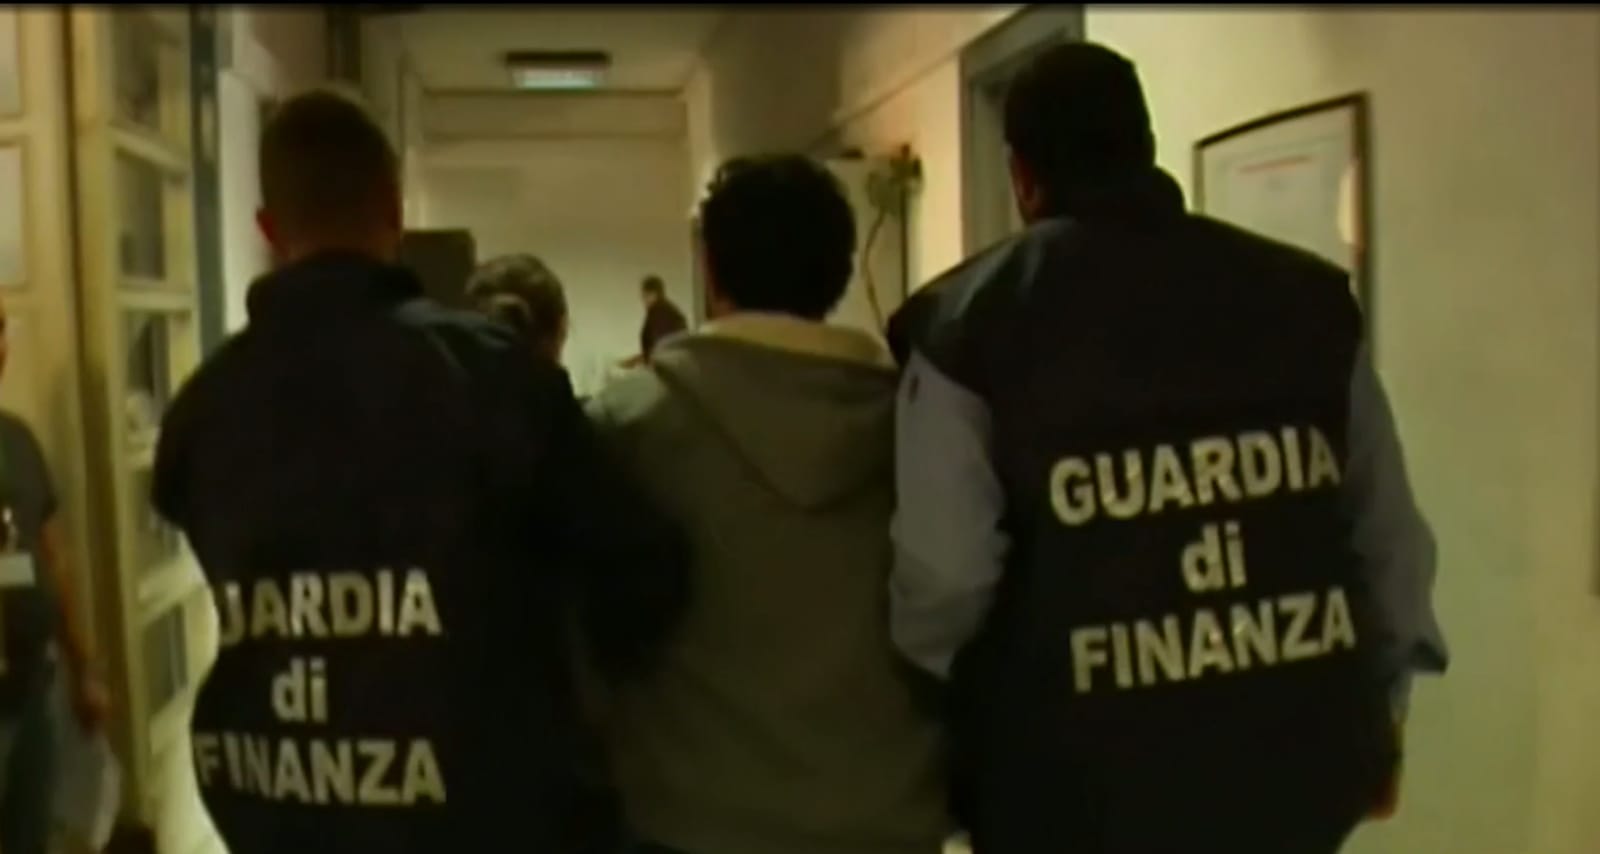 One of the suspects is arrested. (Photo: Guardia di Finanza)